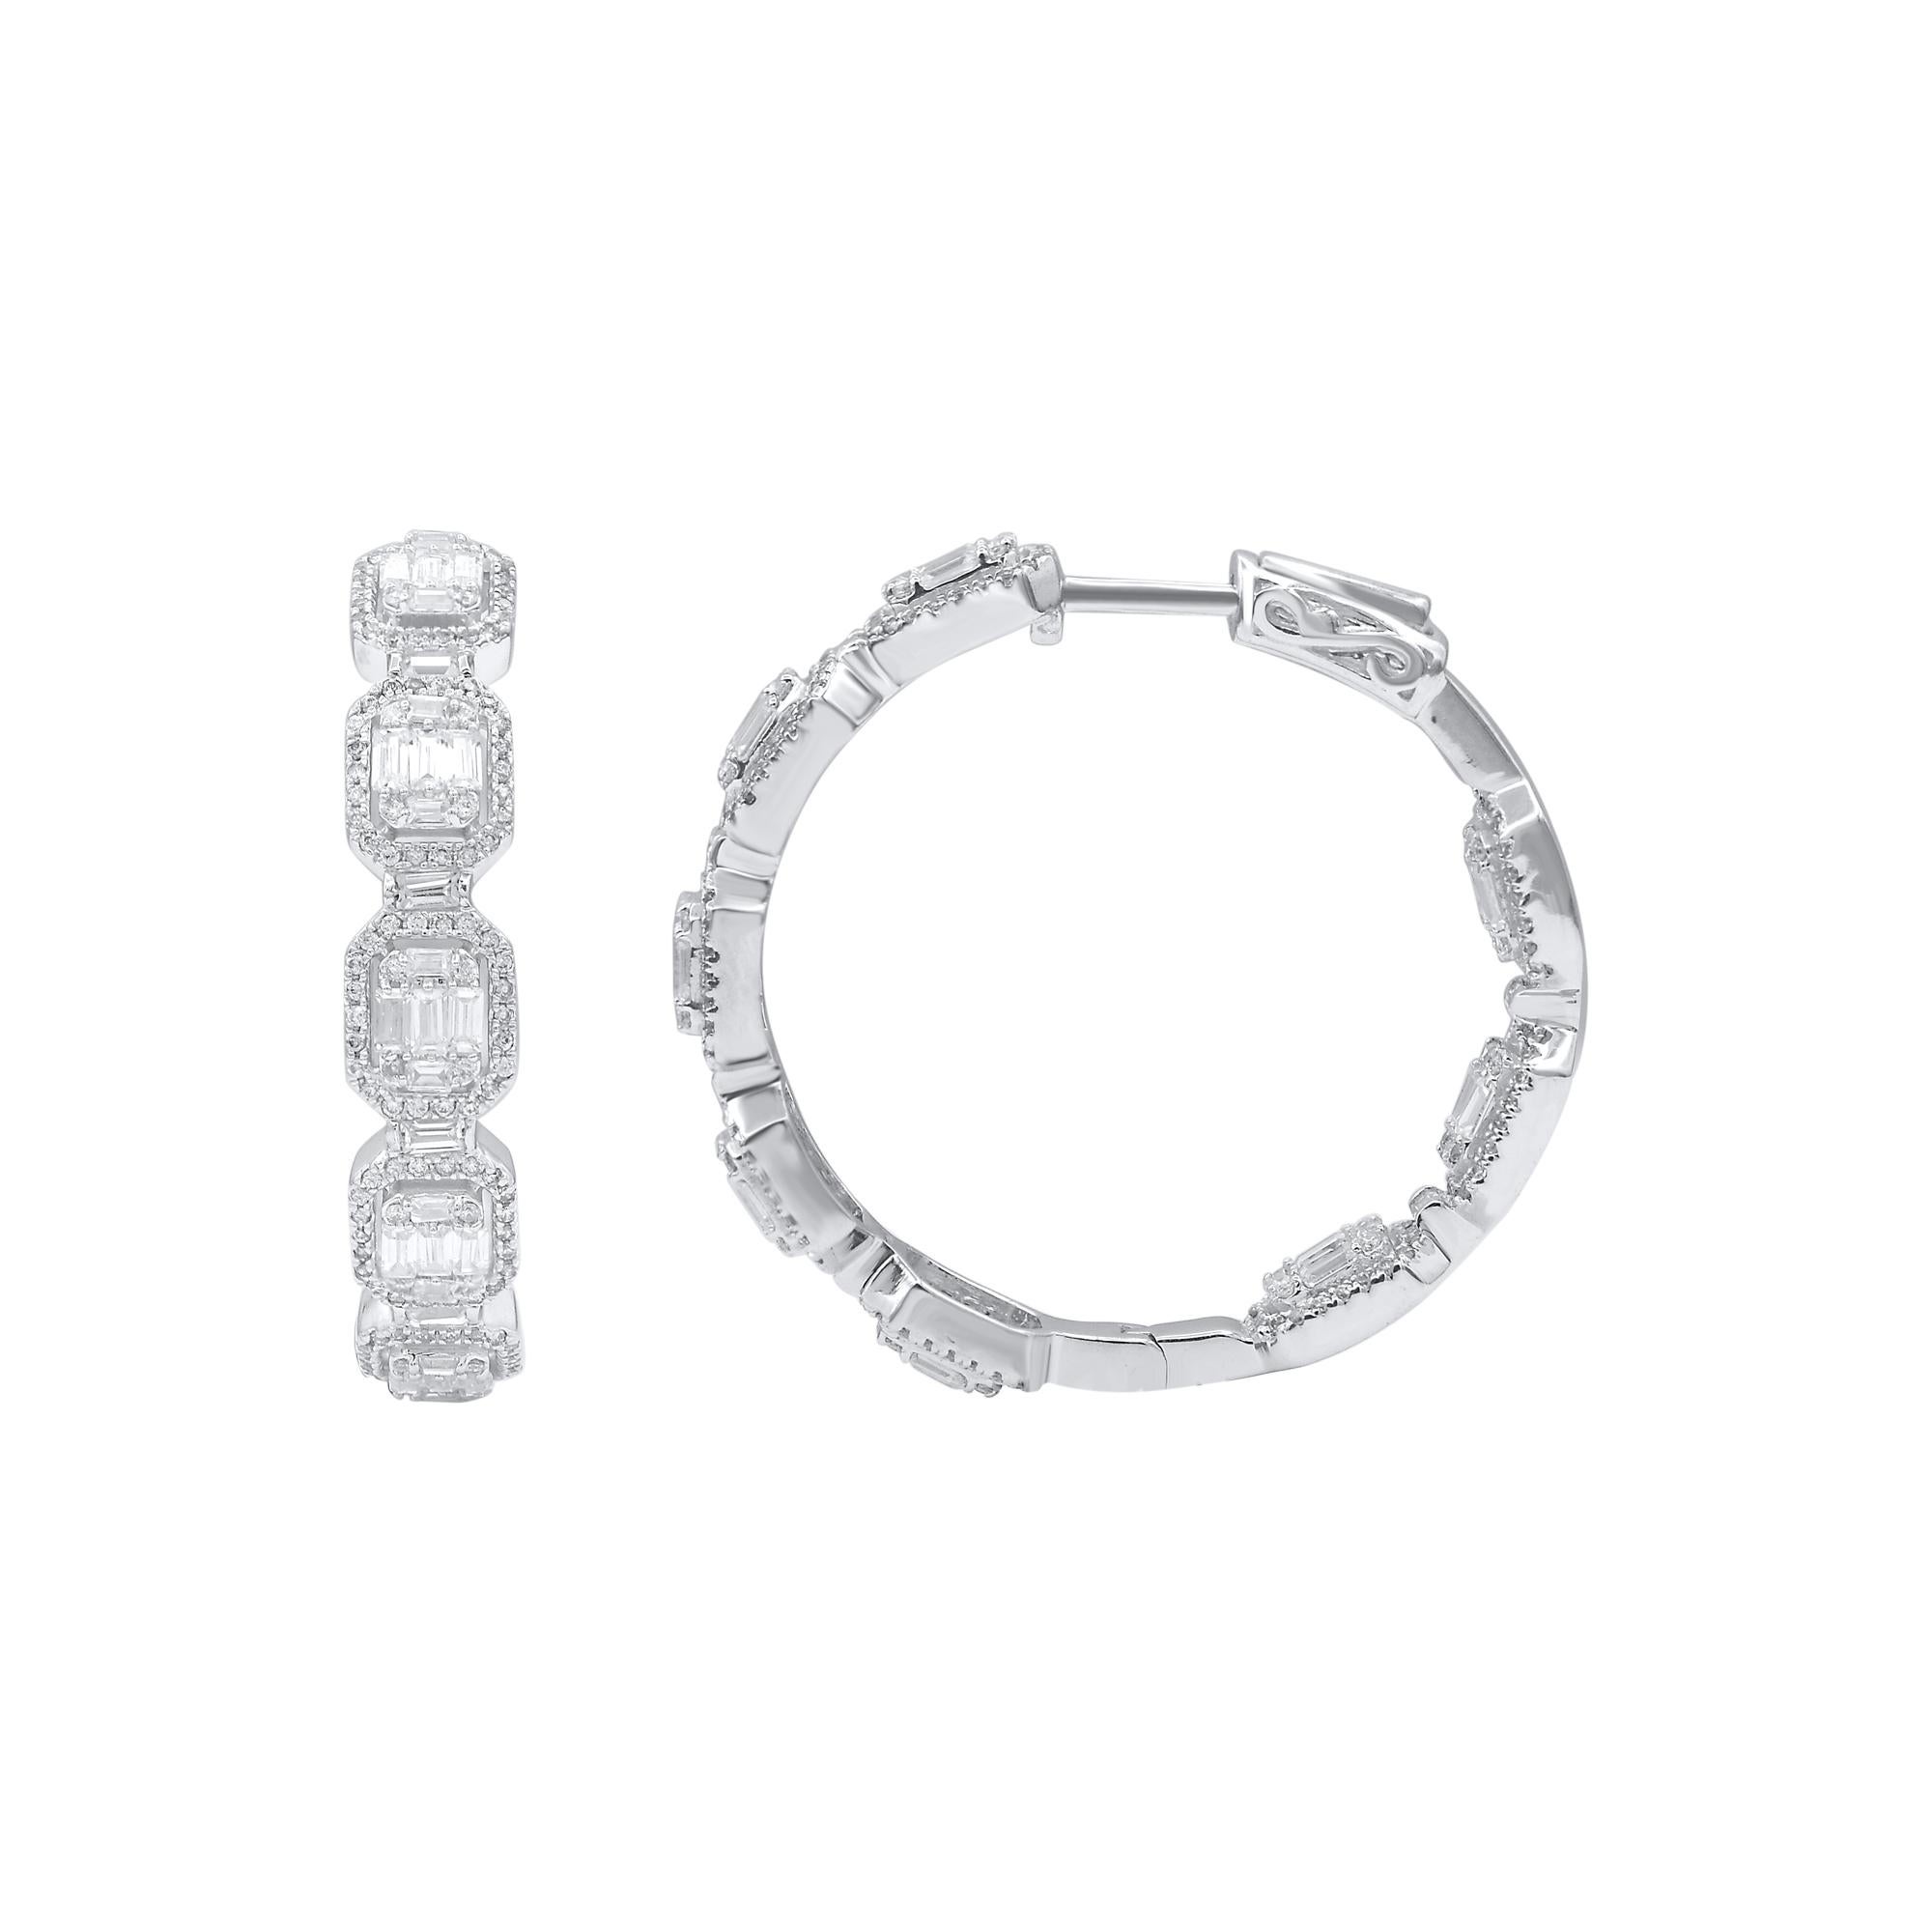 Classic and stylish diamond studded hoop earrings! perfect for daily wear. Crafted in 14 karat white gold with 508 round cut & baguette diamond in prong & channel setting. These earrings secure with hinged backs. The white diamonds are graded as H-I